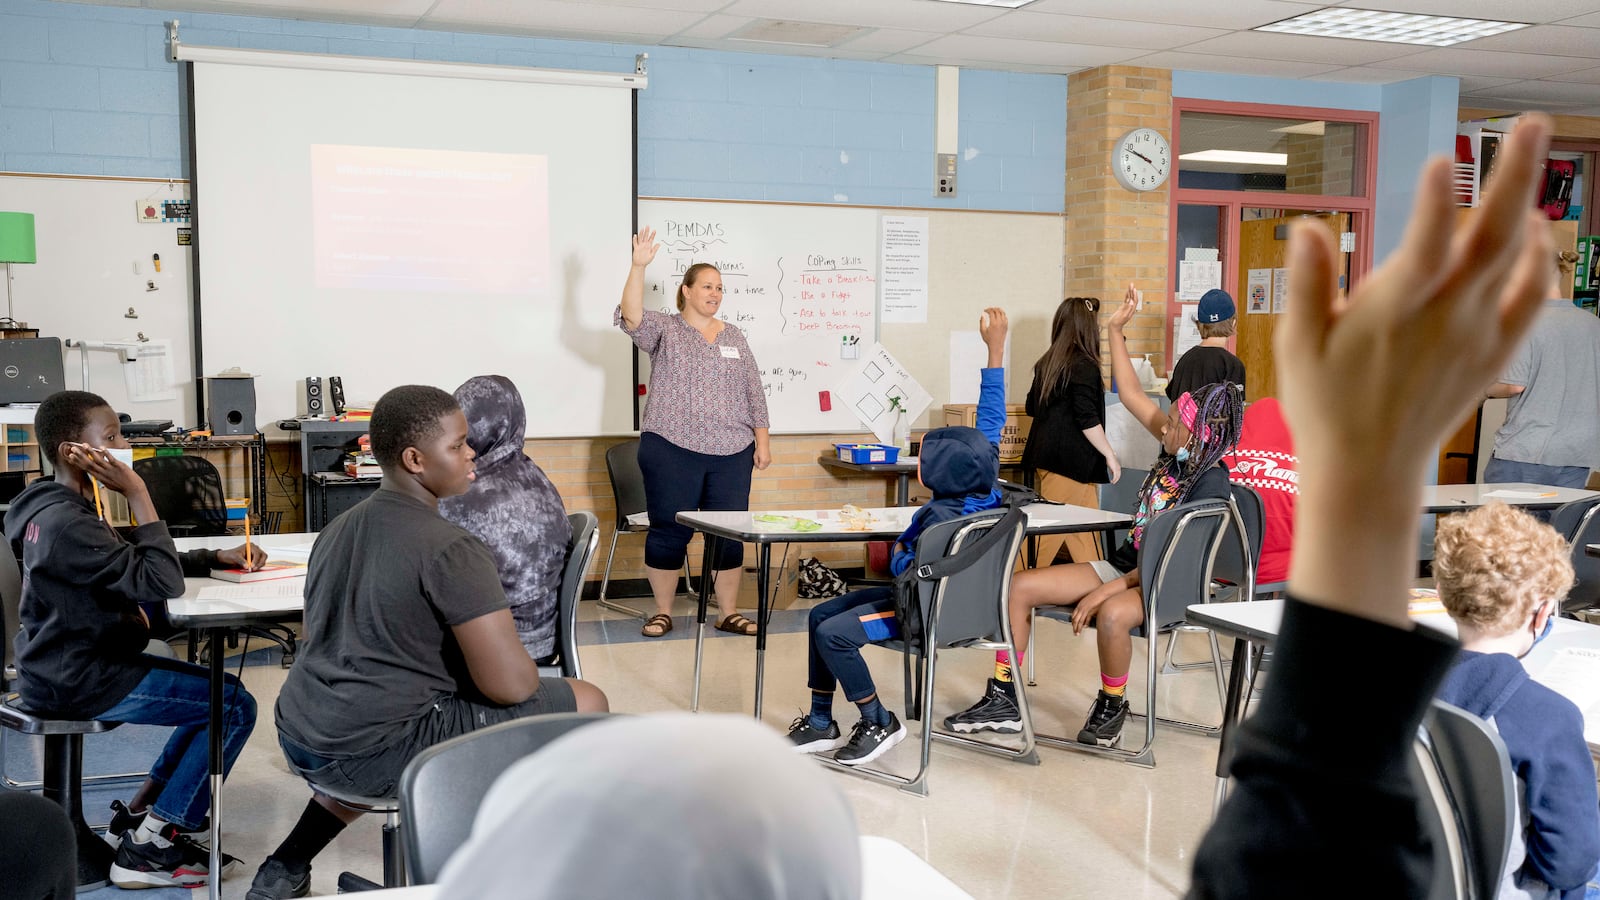 A woman teacher leads her classroom during a lesson, a student in the foreground raising their hand amongst other students in the class.